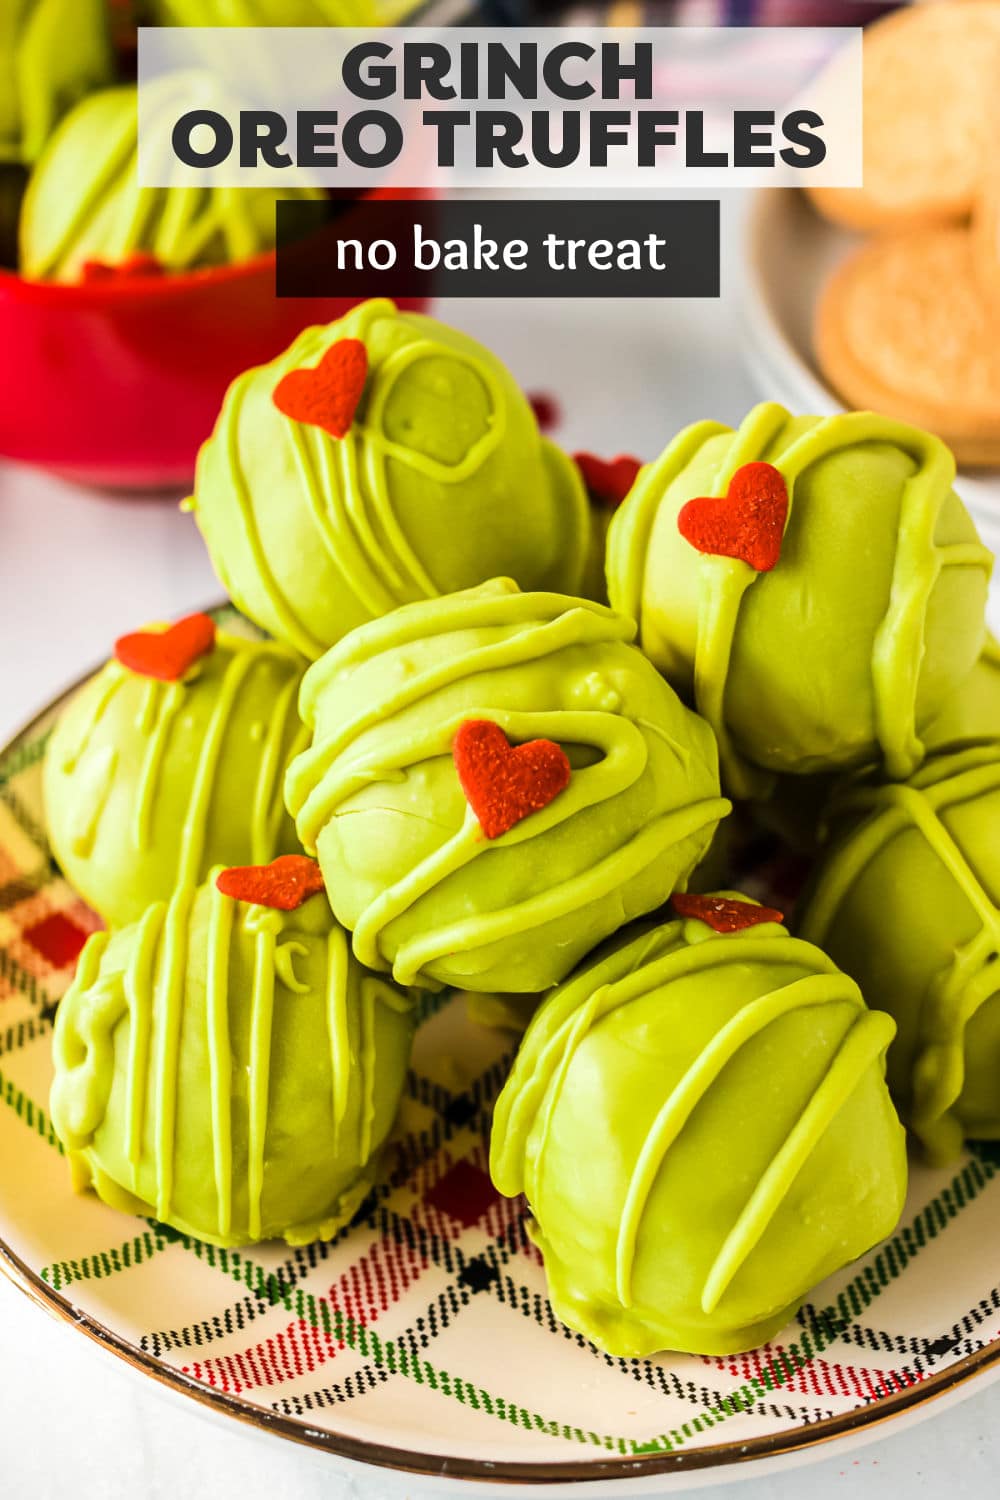 Four ingredient Grinch Oreo Truffles are easily made with golden Oreos, cream cheese, and sprinkles. Dipped in green candy melts and topped with a tiny red heart-shaped sprinkle, this no-bake treat is the perfect addition to your holiday cookie tray! | www.persnicketyplates.com